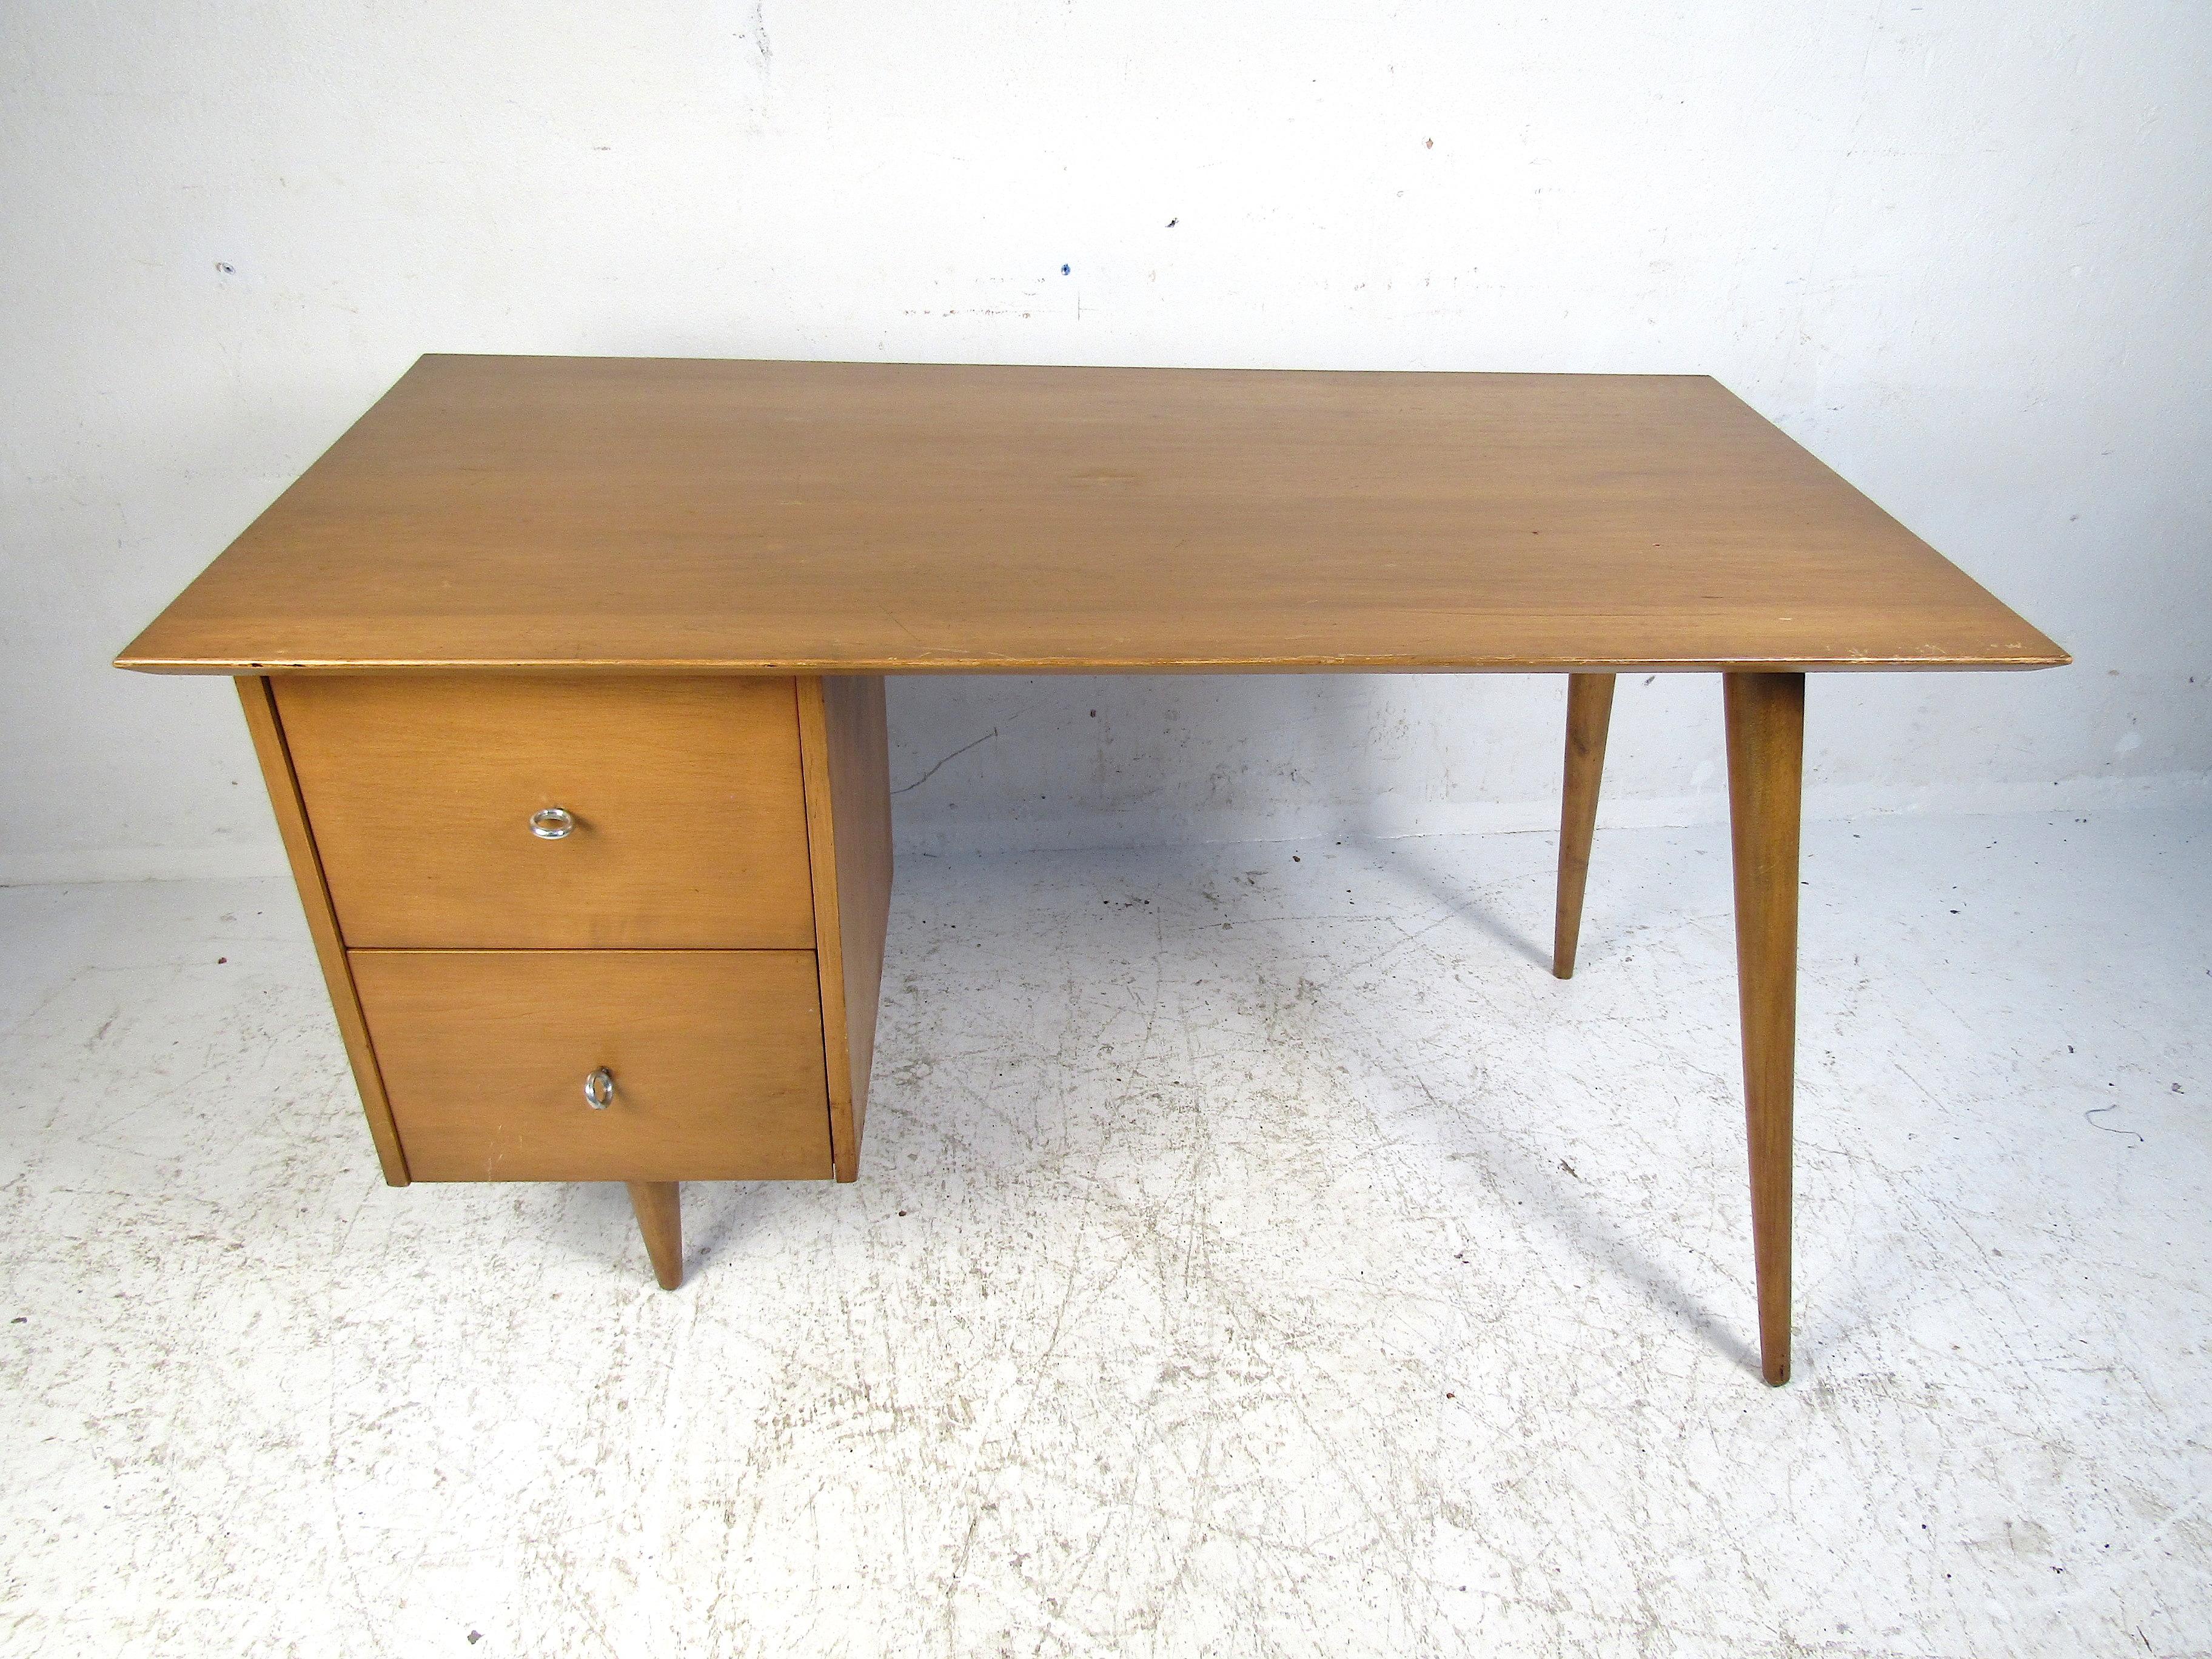 Classic midcentury desk designed by Paul McCobb for Winchendon's 